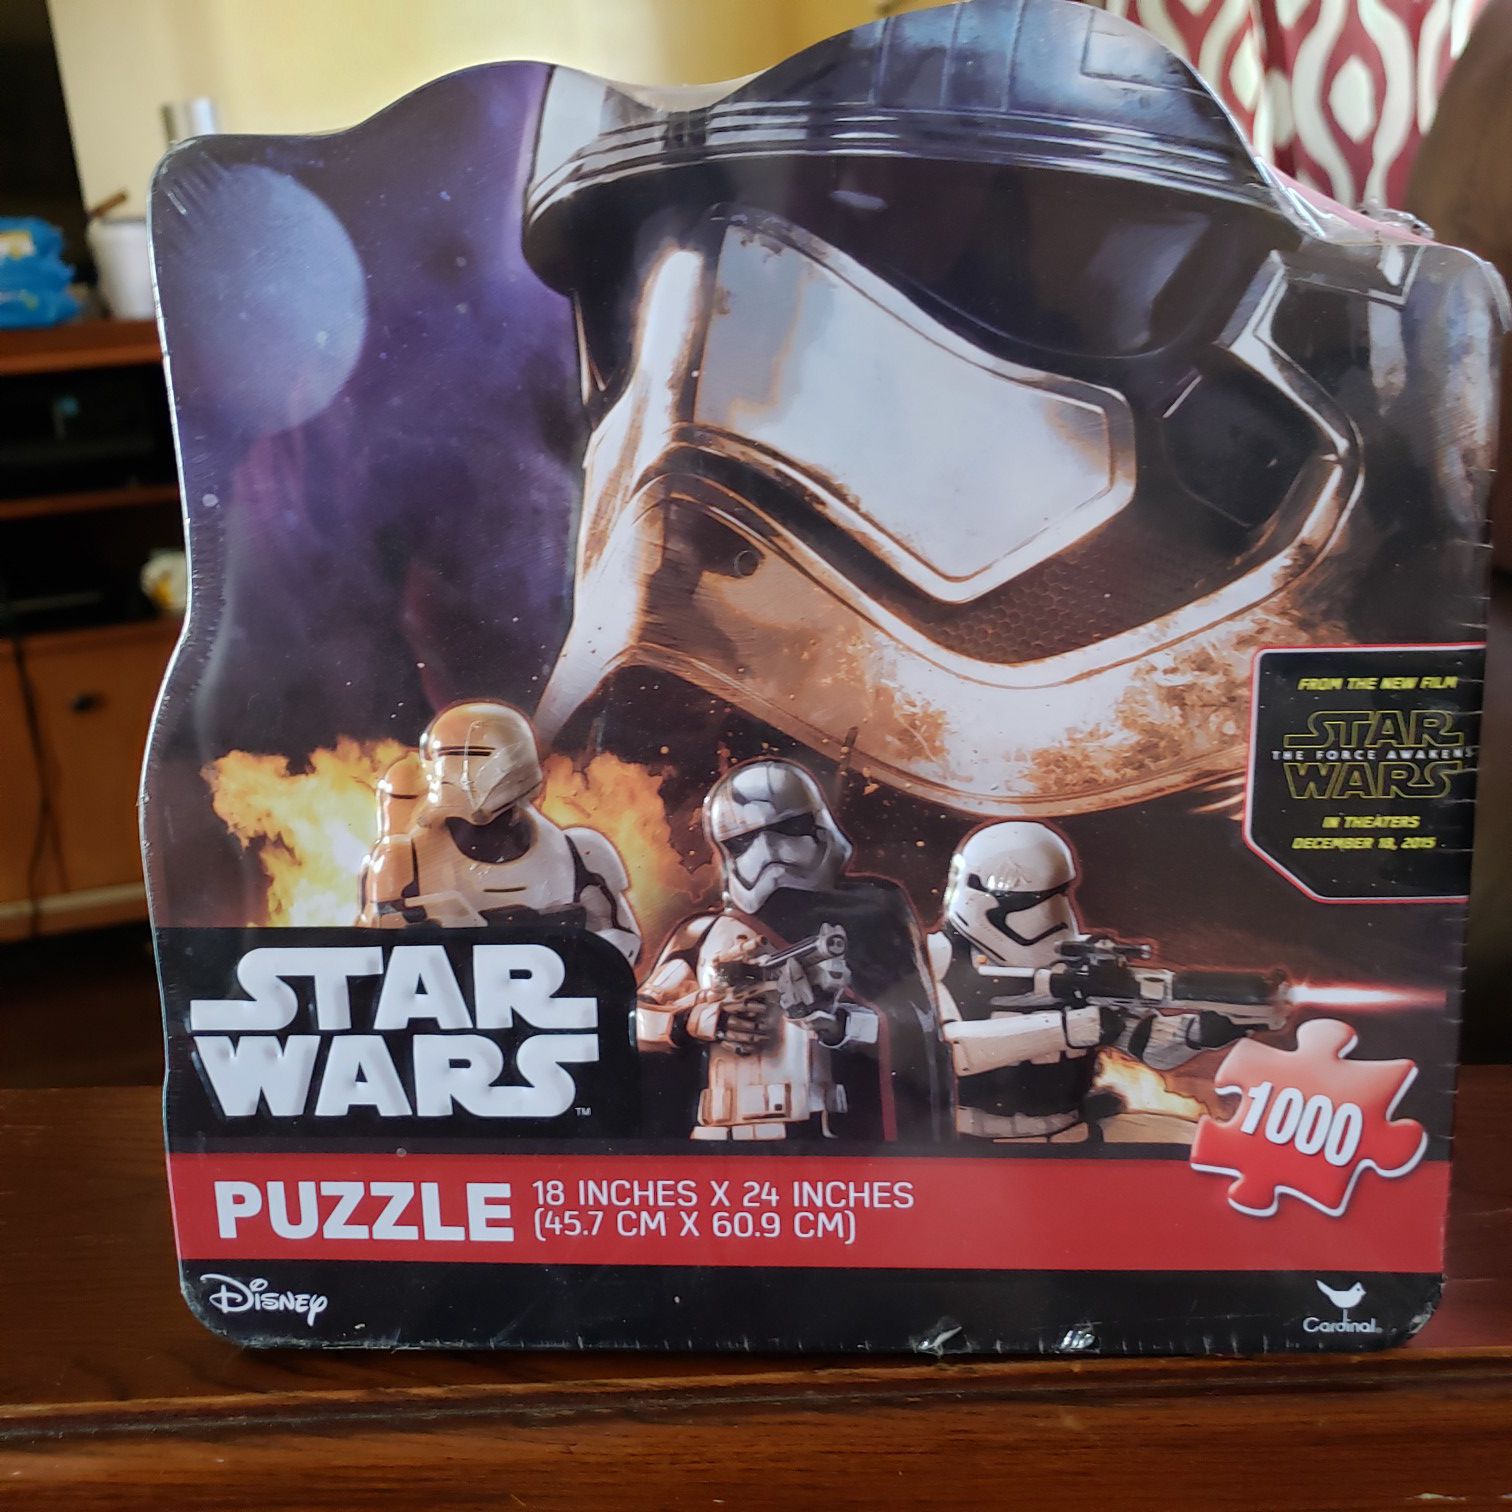 Star Wars Puzzles Disney's Star Wars Puzzle Box Games and Toys Star Wars MAKE AN OFFER!!